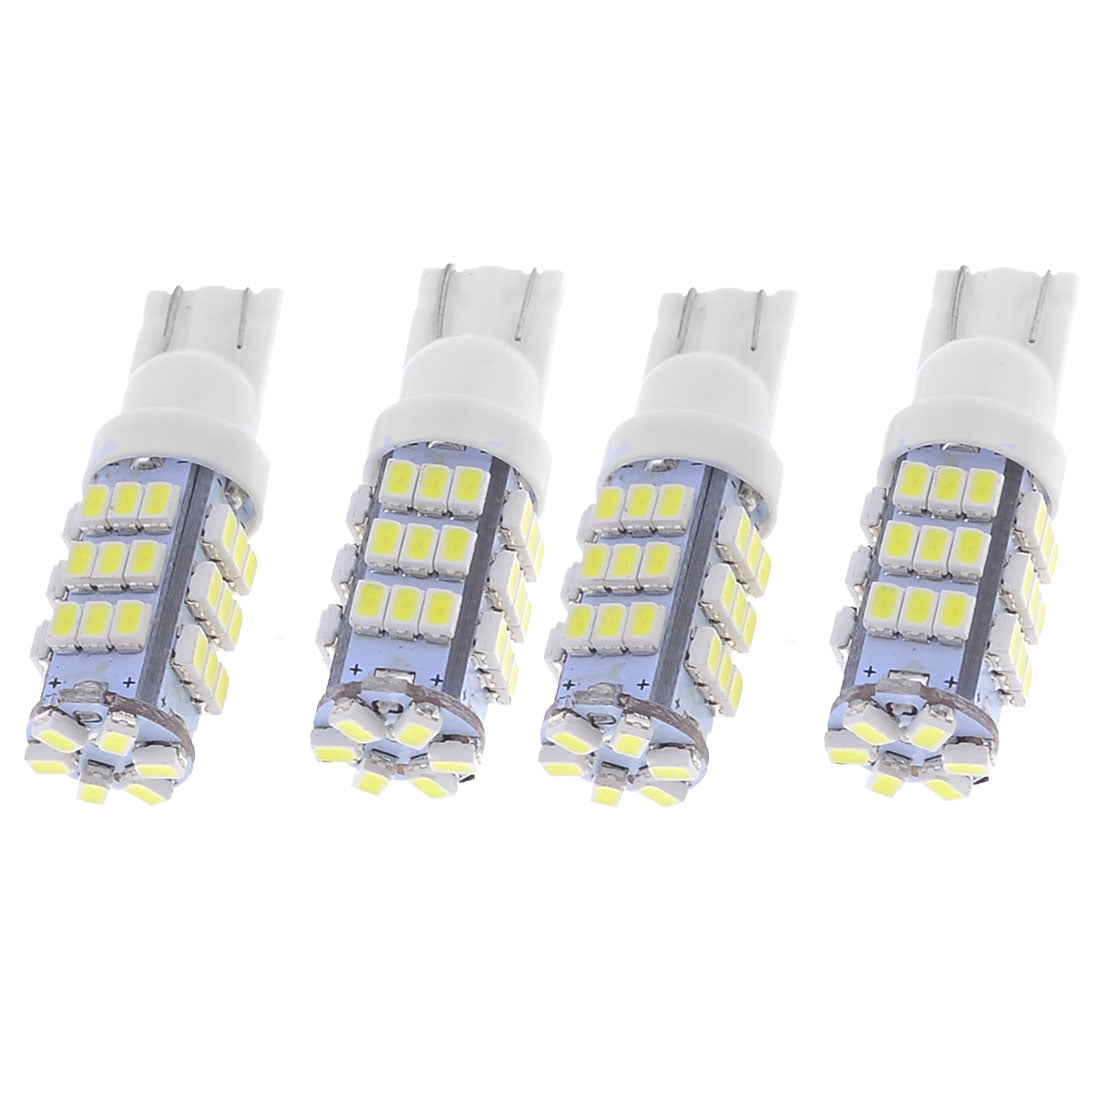 20-Pcs 12V T10 42-SMD Warm White Camper Trailer LED Light Bulbs replacement 504 